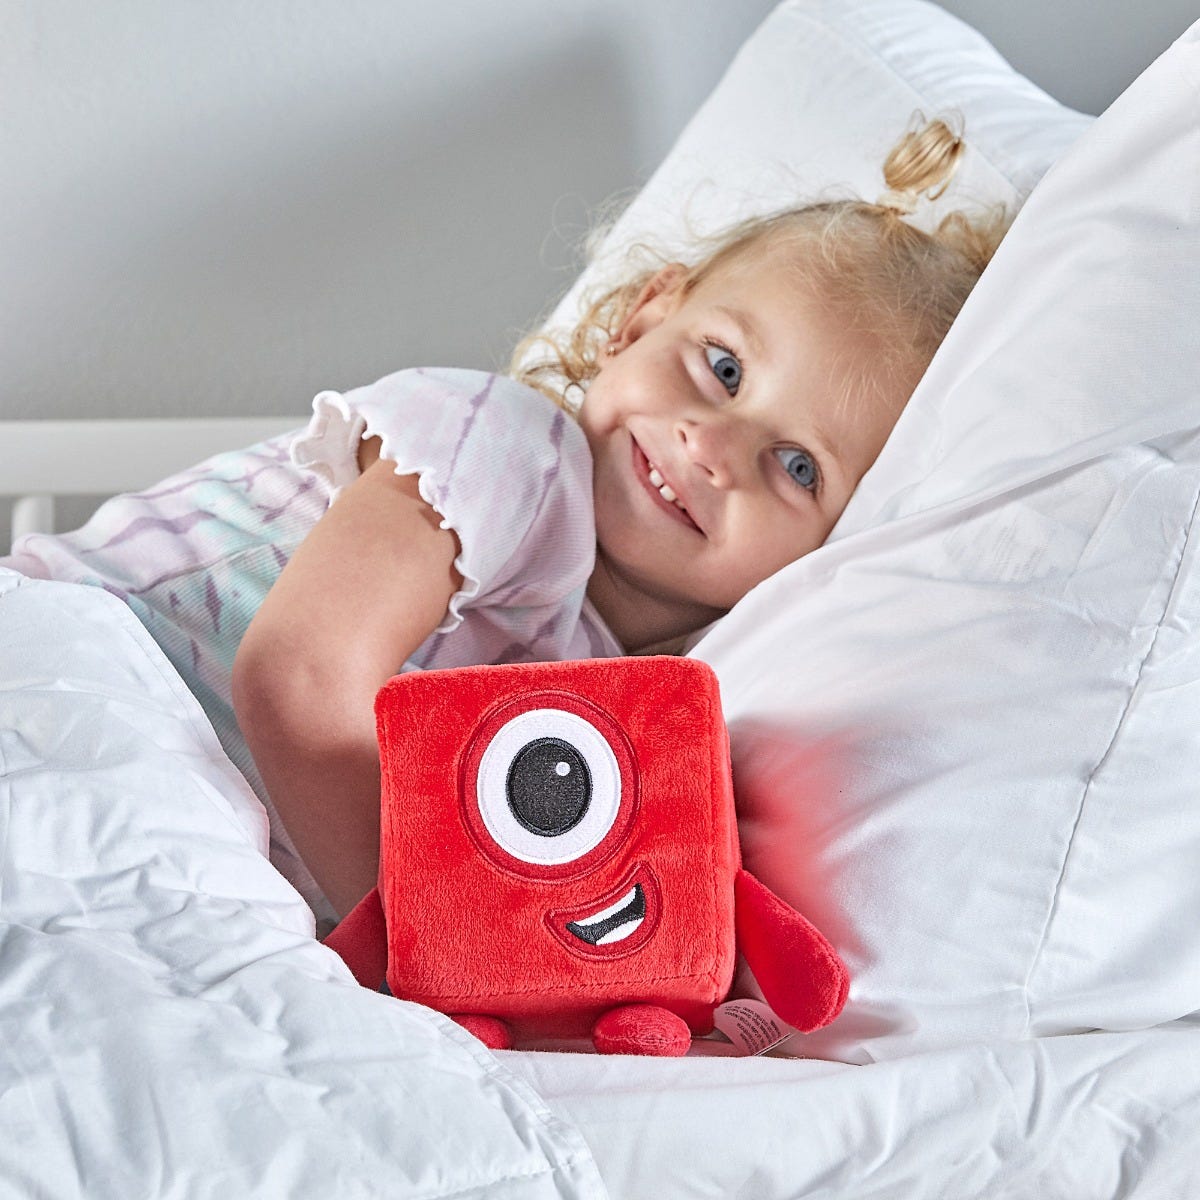 Numberblock One, Bring the on-screen magic of the Numberblocks to life for young fans of the award-winning CBeebies TV series with this Numberblocks One plush toy. The Numberblock One is made from super-soft plush fabric and with embroidered features, it’s ready for cuddles and snuggles. This plush toy is stuffed with high quality foam to keep its shape, with securely attached limbs, and will be a fun, cuddly companion for years to come. This bright, fun soft Numberblocks toy will inspire young imaginations